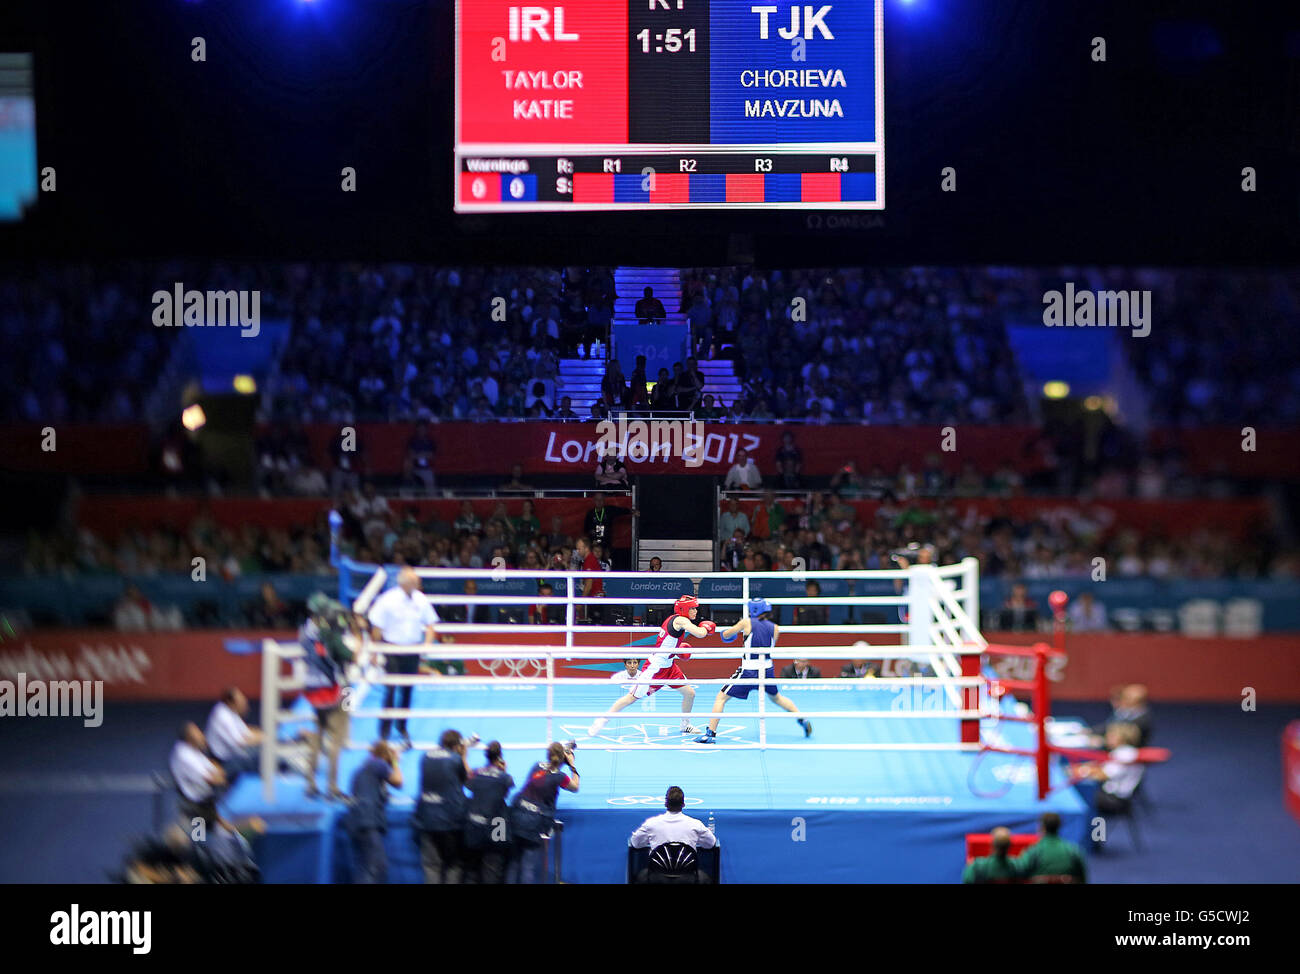 Ireland's Katie Taylor (red) in action in her Women's Boxing Lightweight 60kg bout against Mavzuna Chorieva in London's Excel Arena during the 2012 Olympic Games. Stock Photo